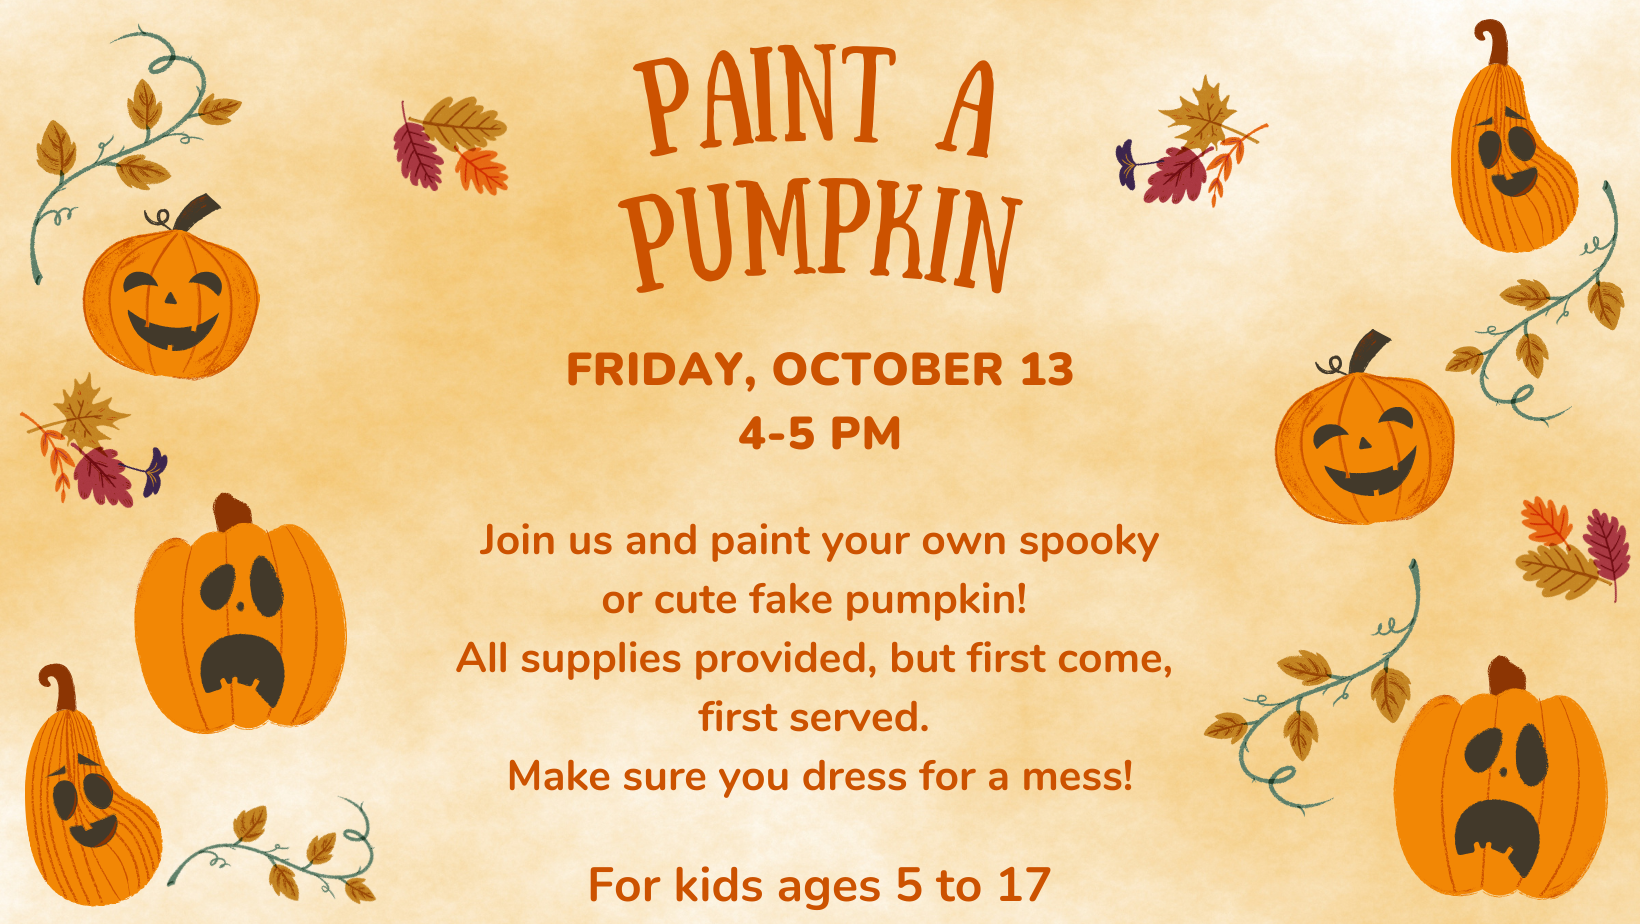 Paint a Pumpkin for kids ages 5-17, Friday, October 13, 4:00 pm